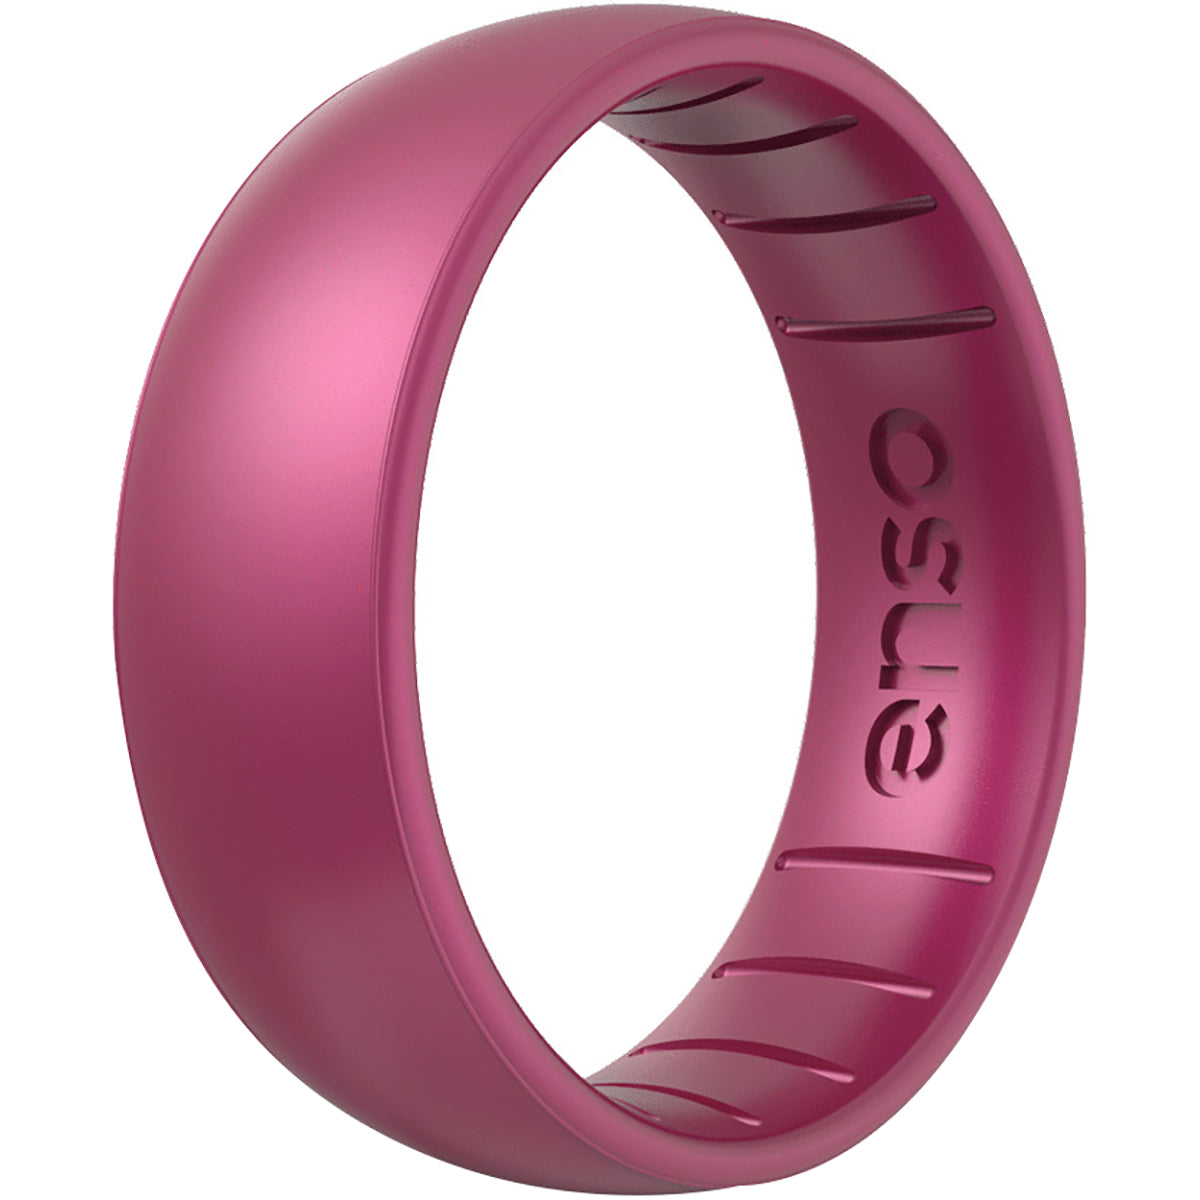 Enso Rings Classic Birthstone Series Silicone Ring - Pink Tourmaline Enso Rings